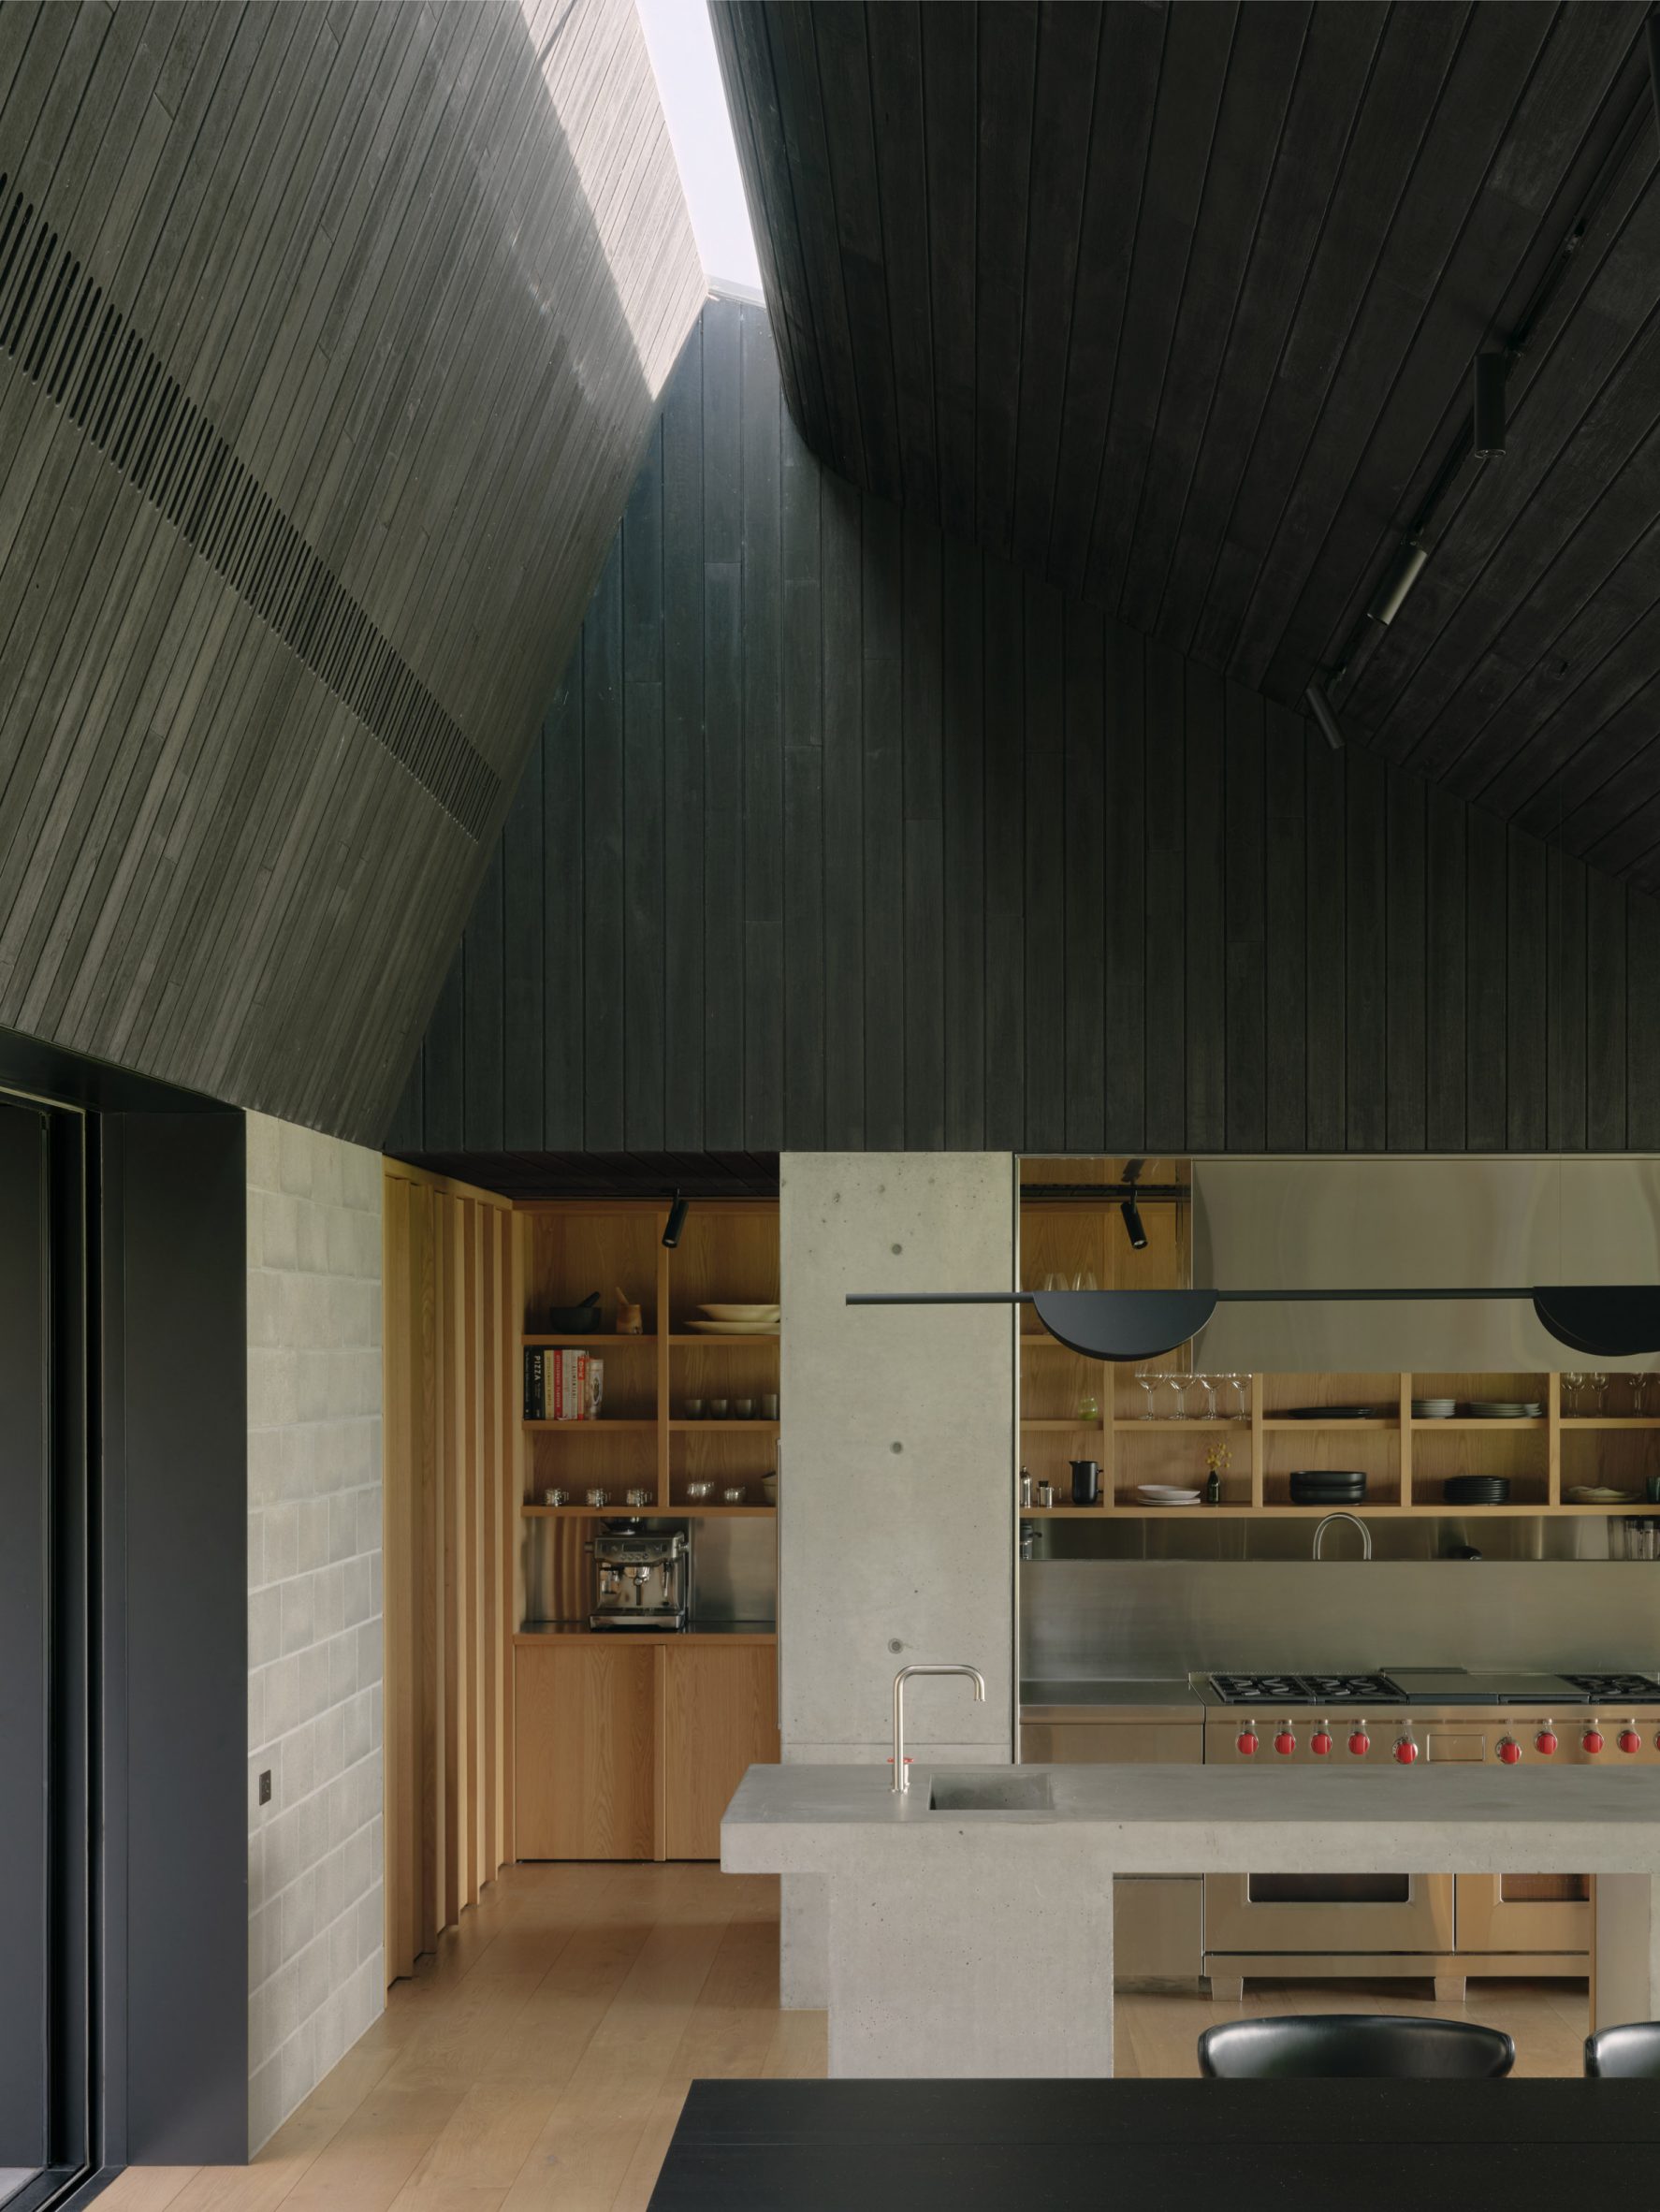 Photo of a kitchen at an Australian home by Michael Lumby Architecture and Nielsen Jenkins